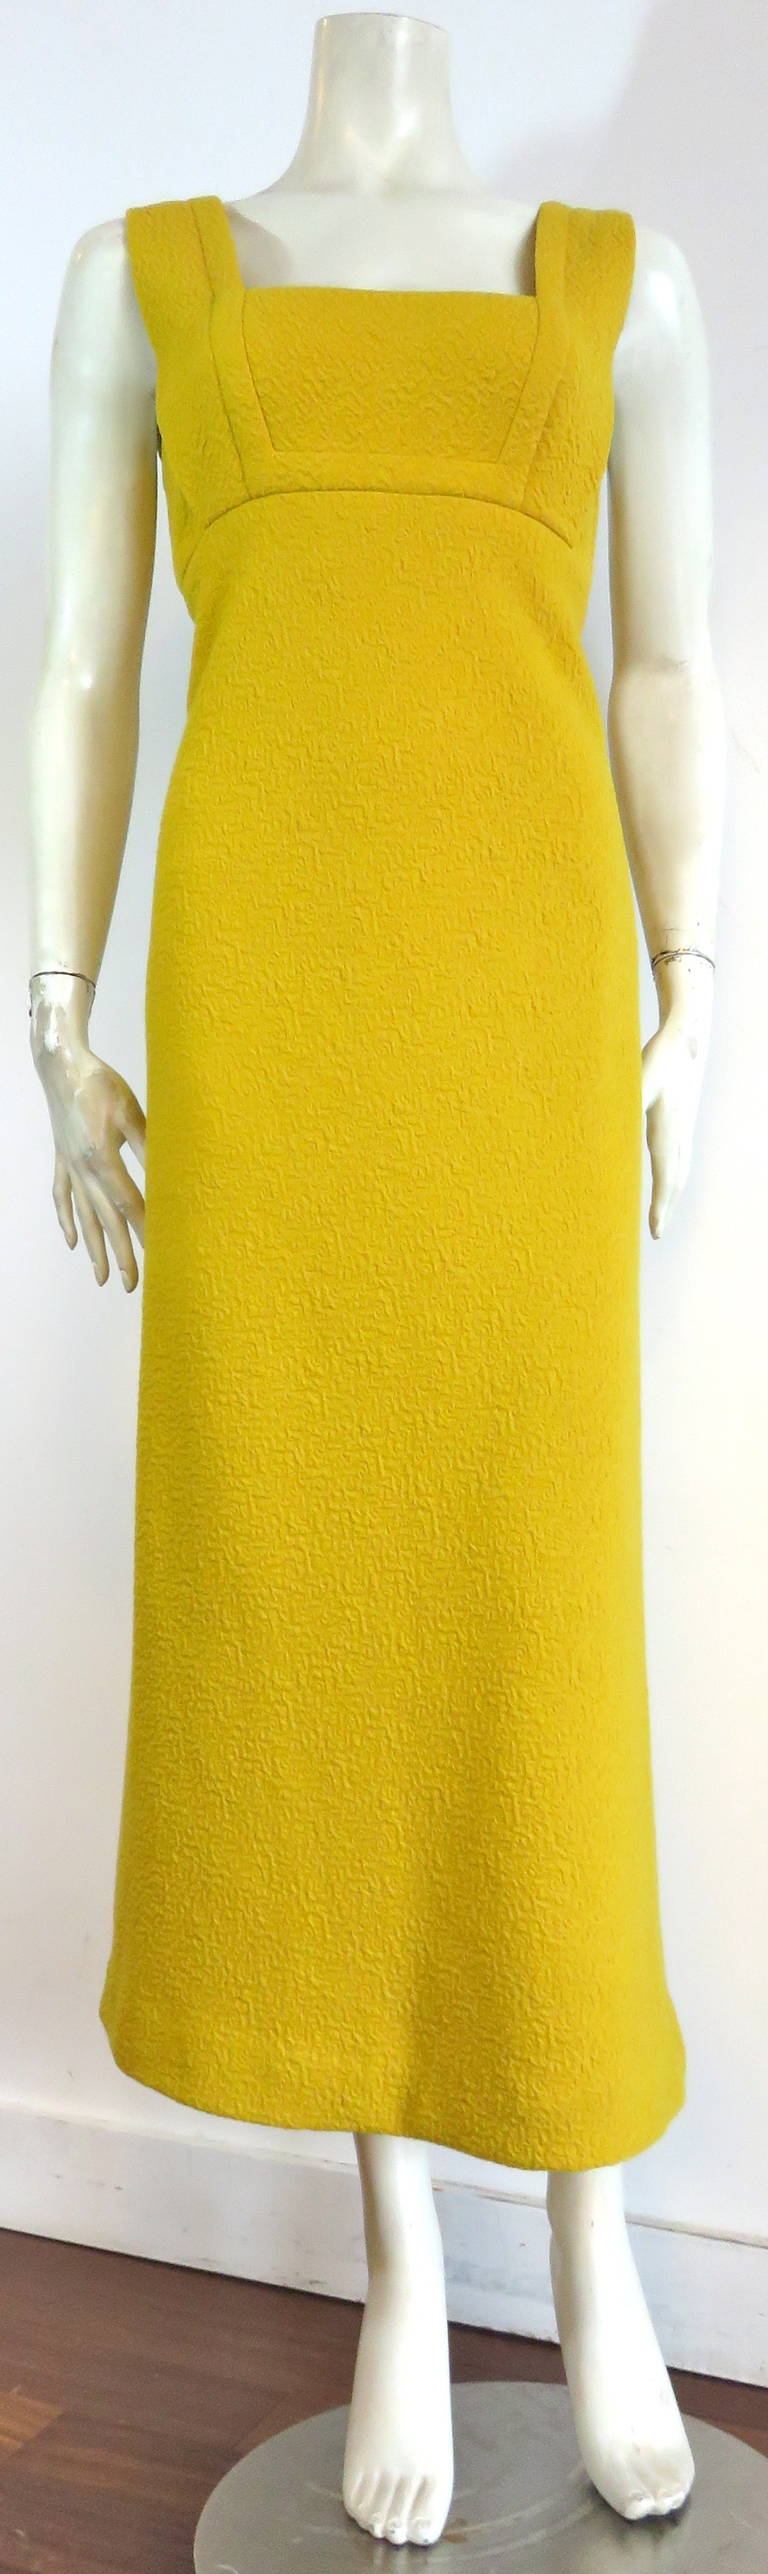 1960's GALANOS Yellow crepe empire dress For Sale 1